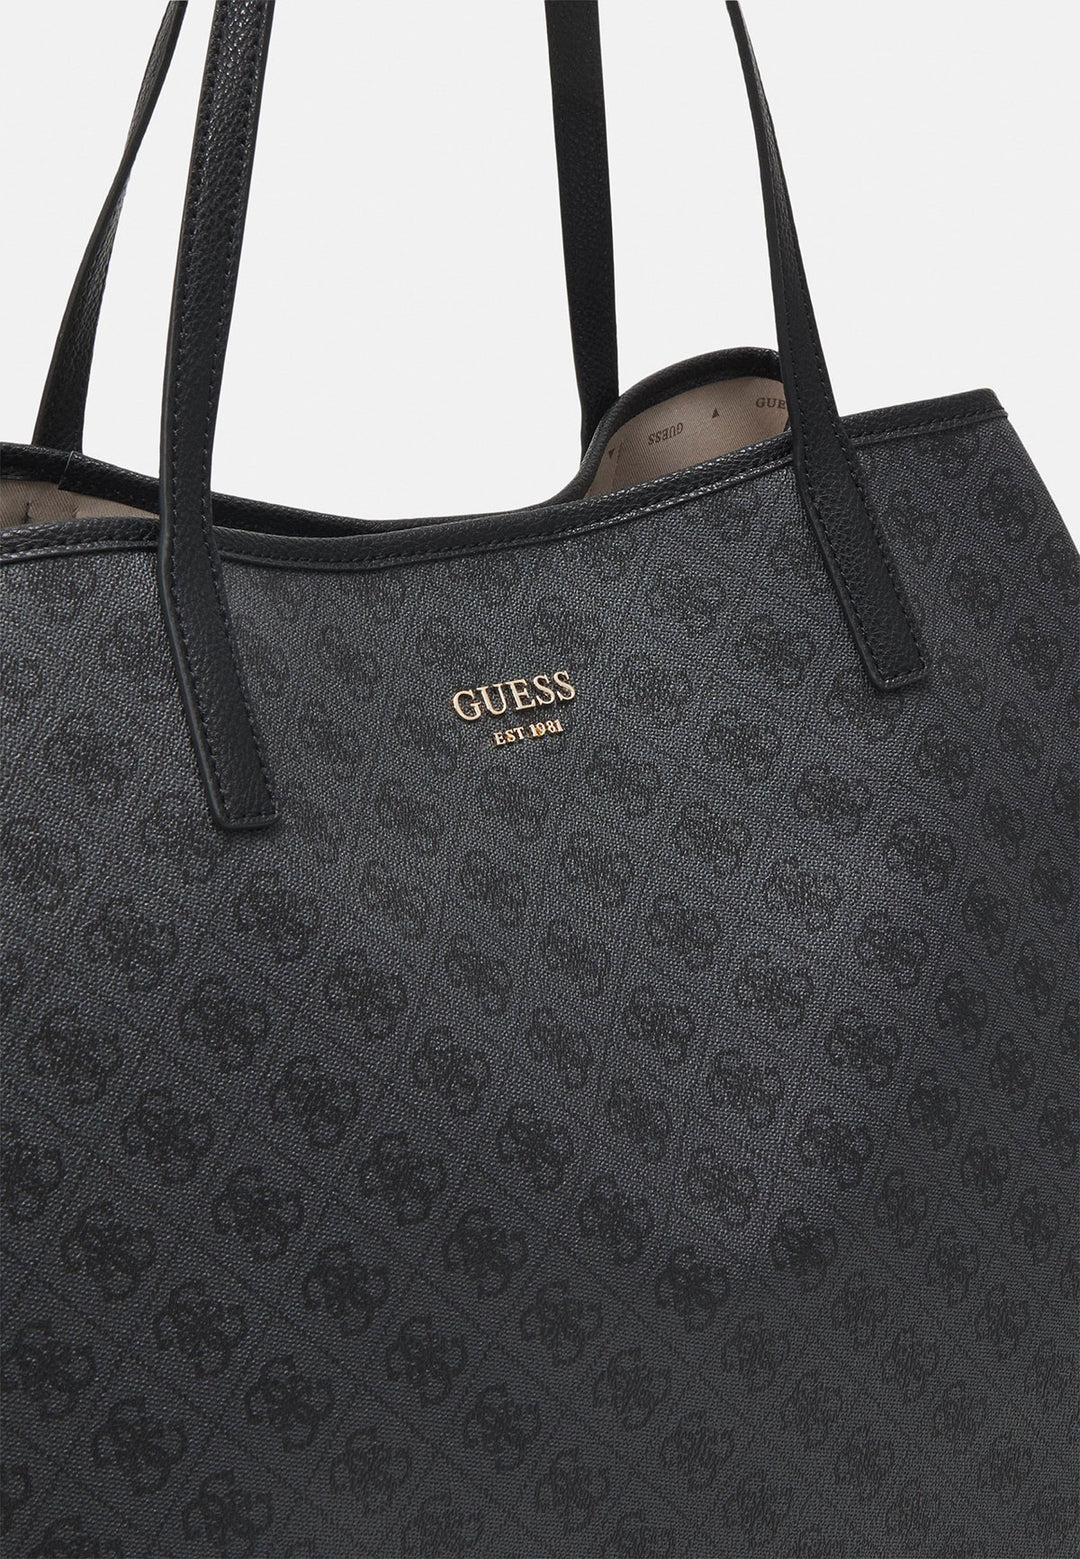 Guess Vikky Tote Bag In Coal For Women